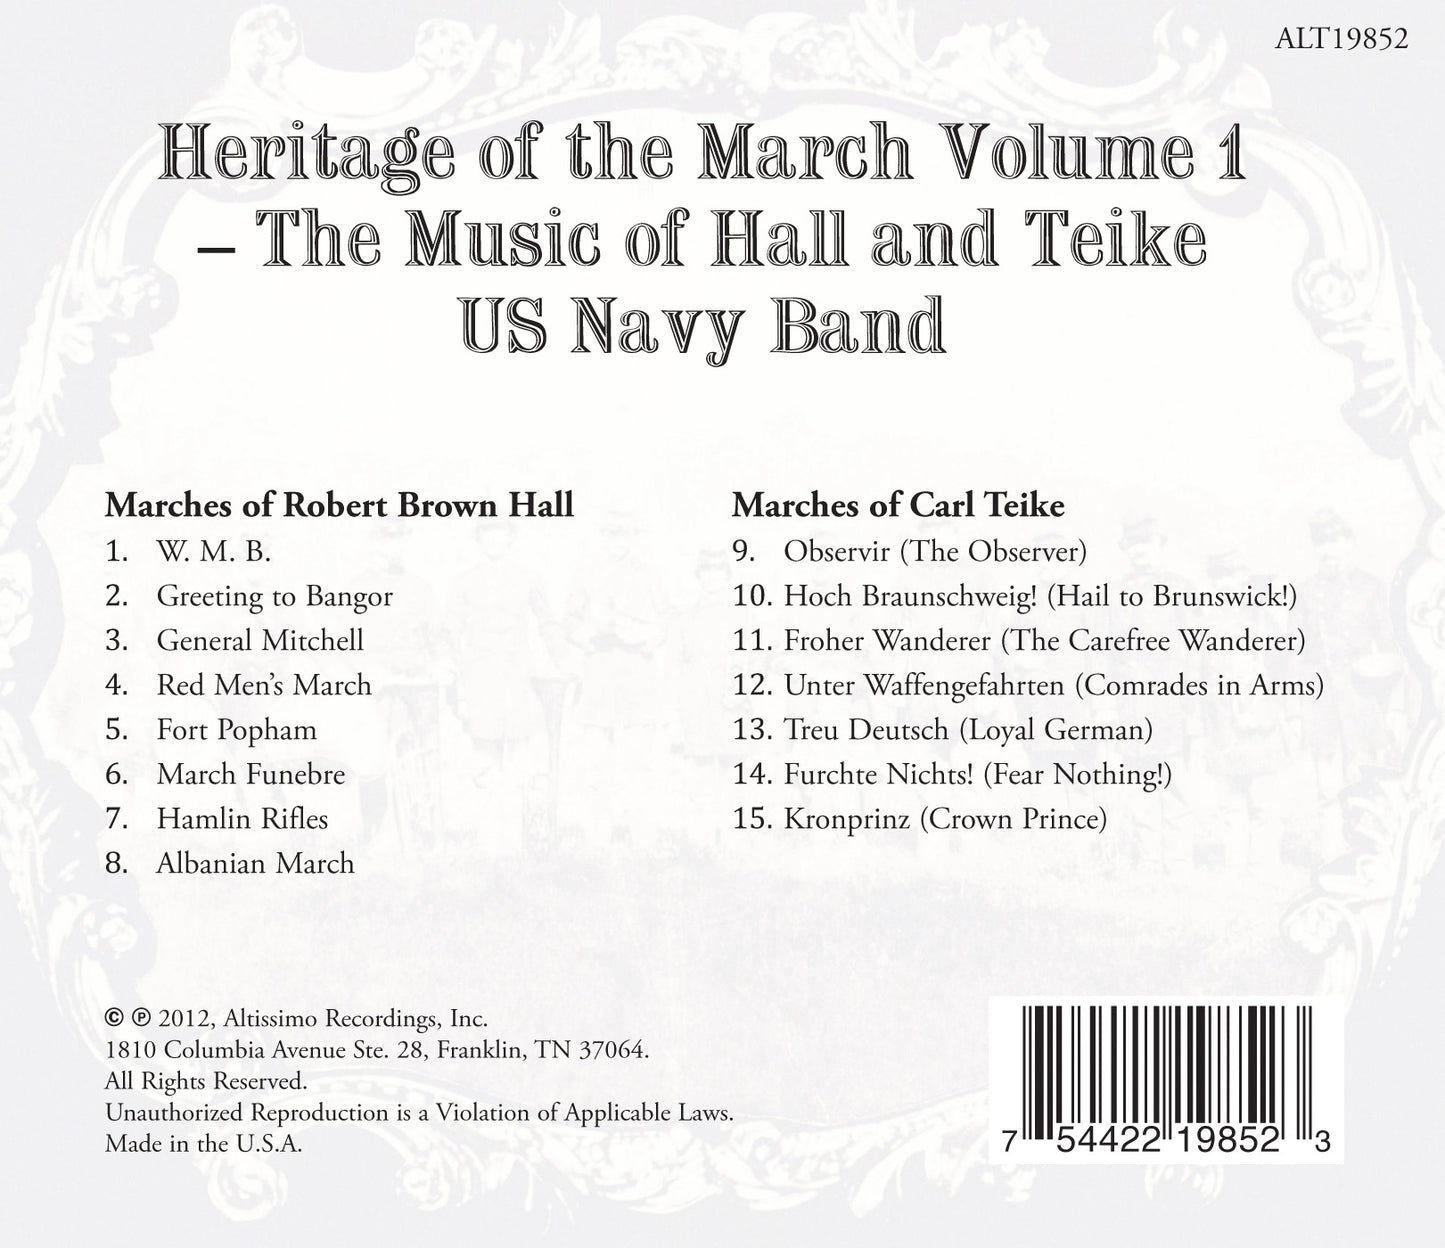 Heritage of the March, Vol. 1